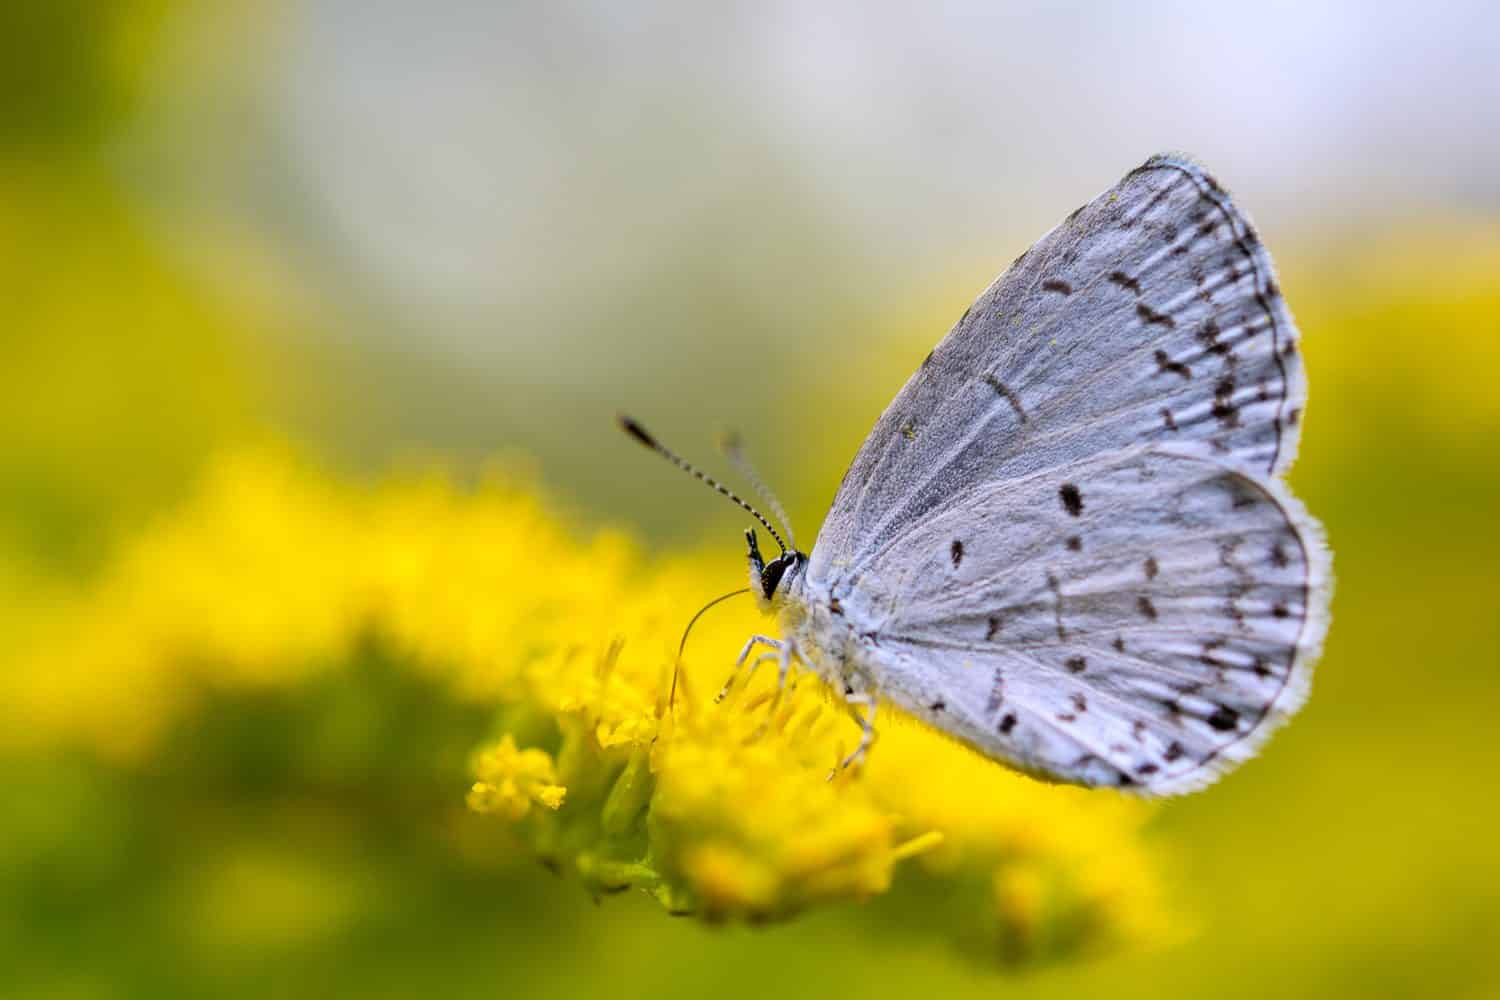 Karner blue butterfly, Plebejus melissa samuelis, on goldenrod. It is now endangered due to the destruction of wild blue lupine habitat that is the only food it's larvae feed on.